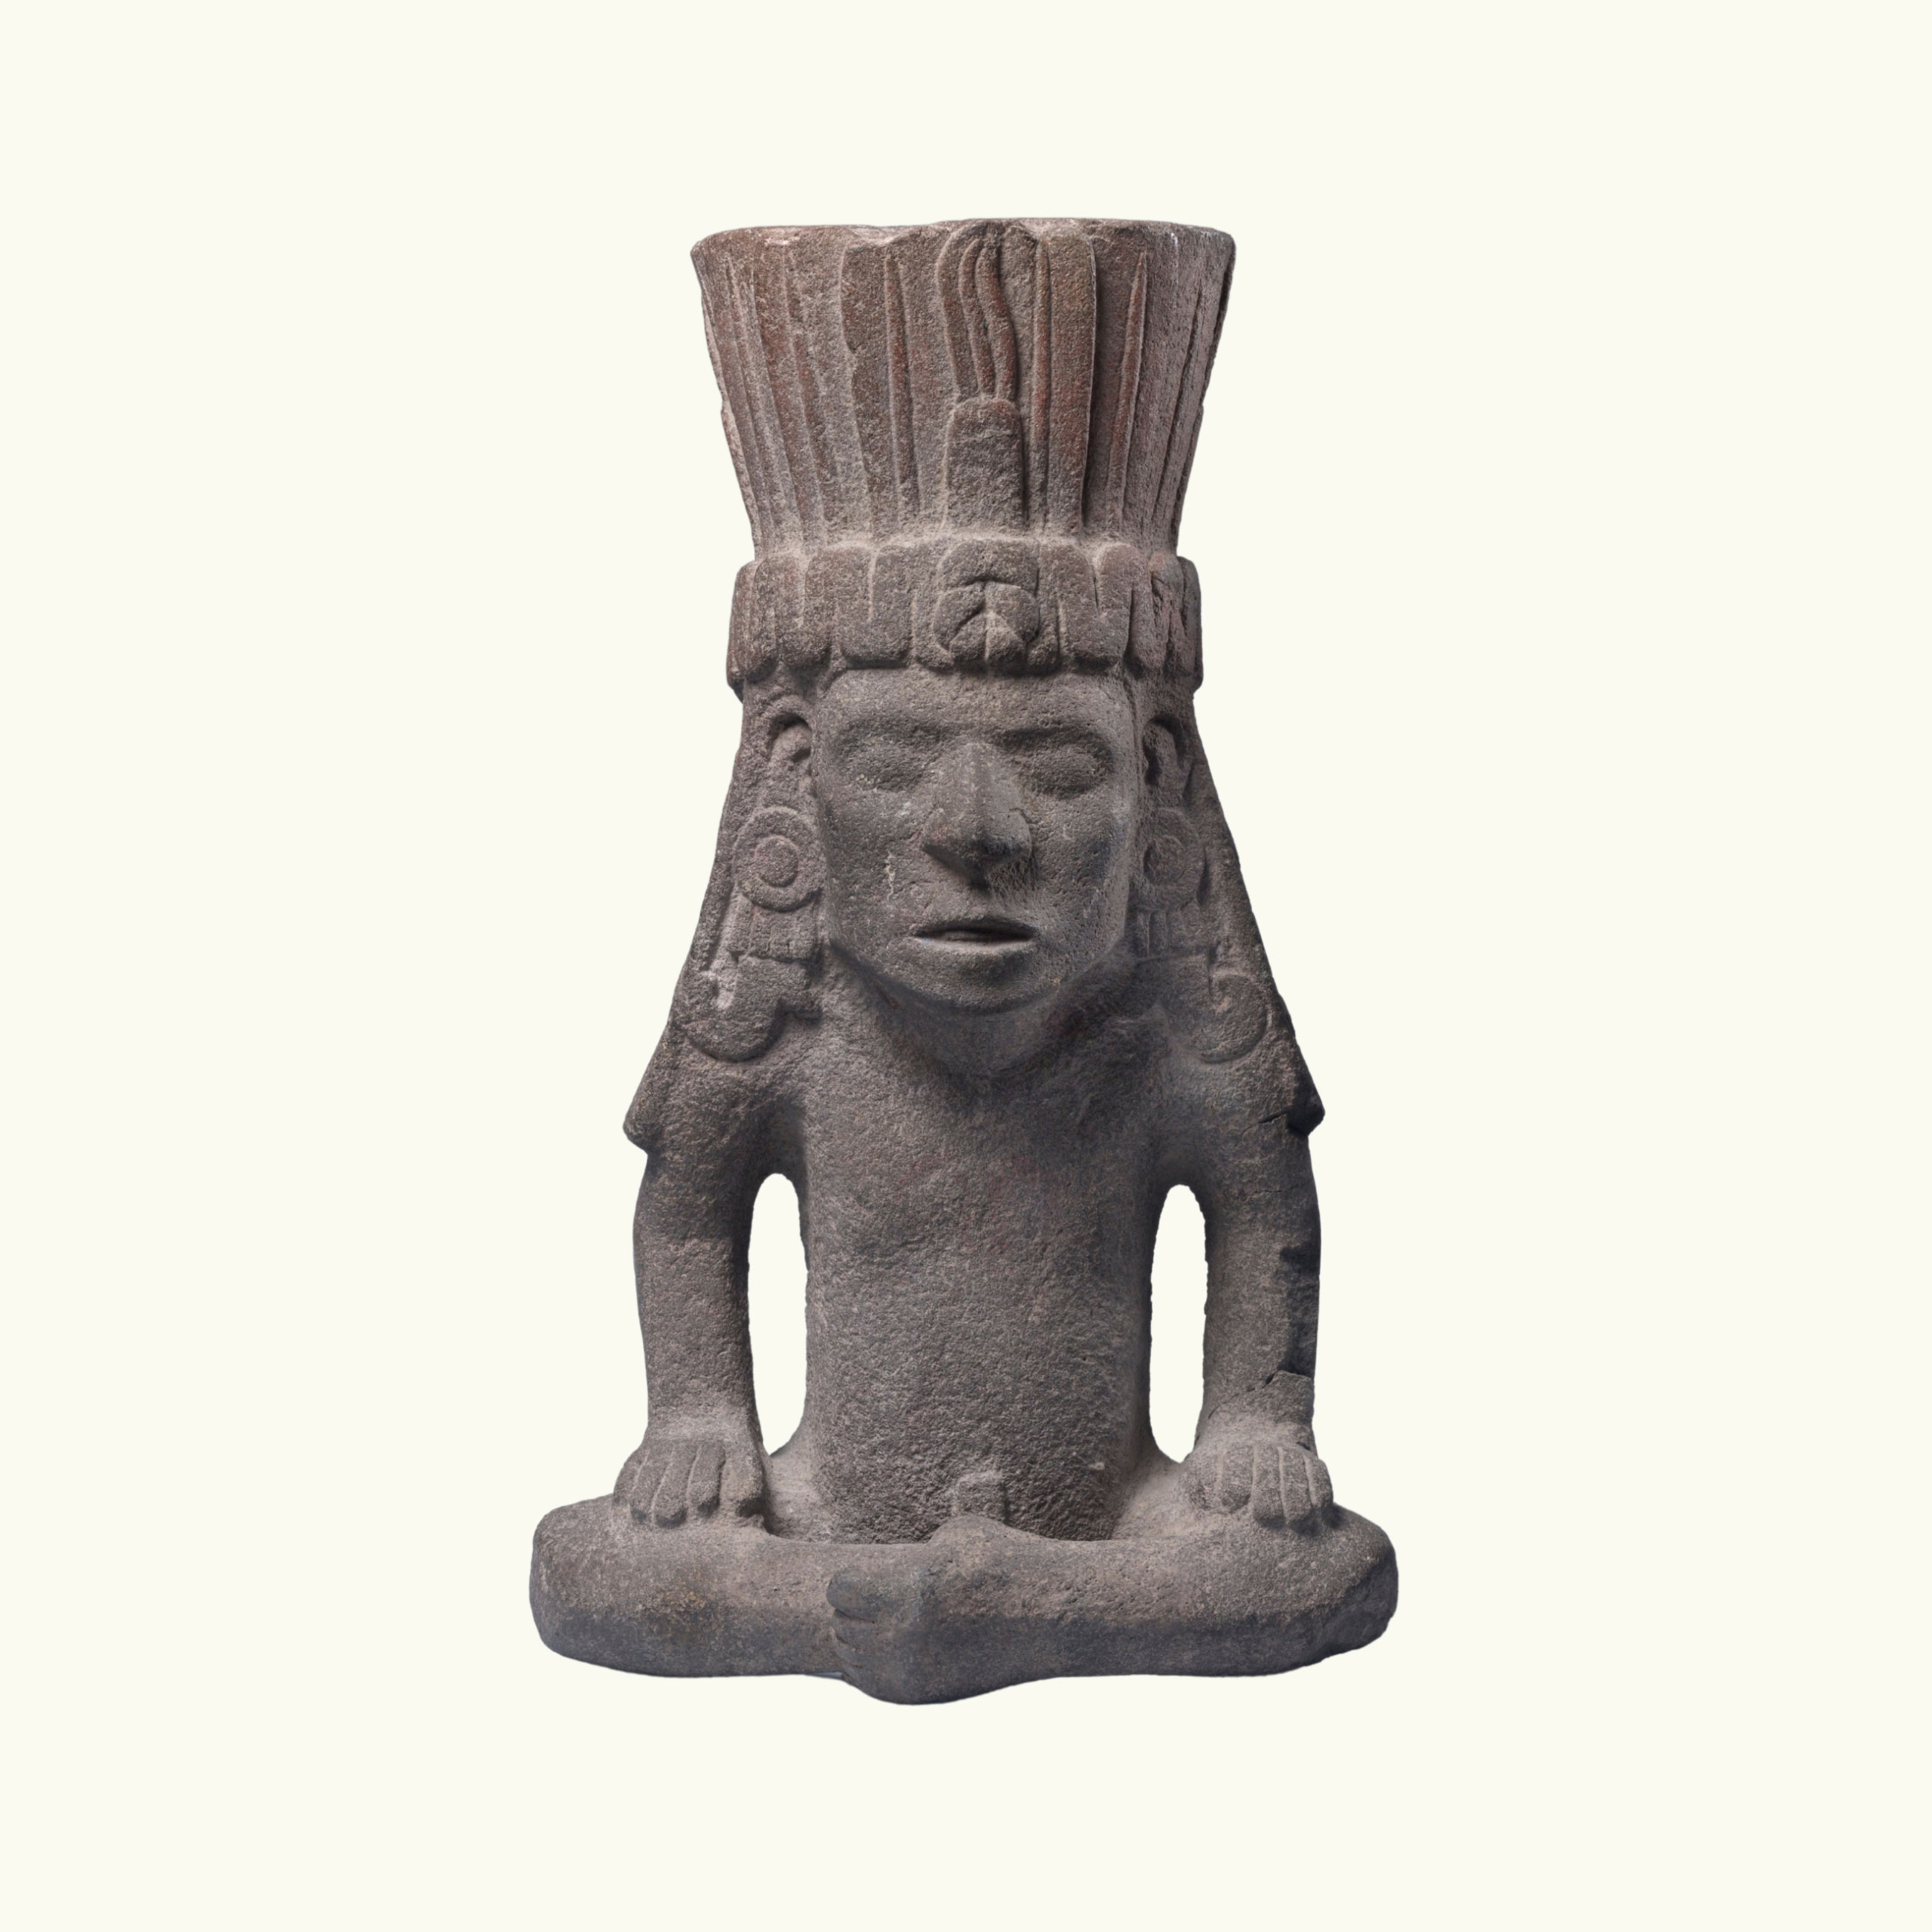 A seated volcanic stone figure with a headdress.